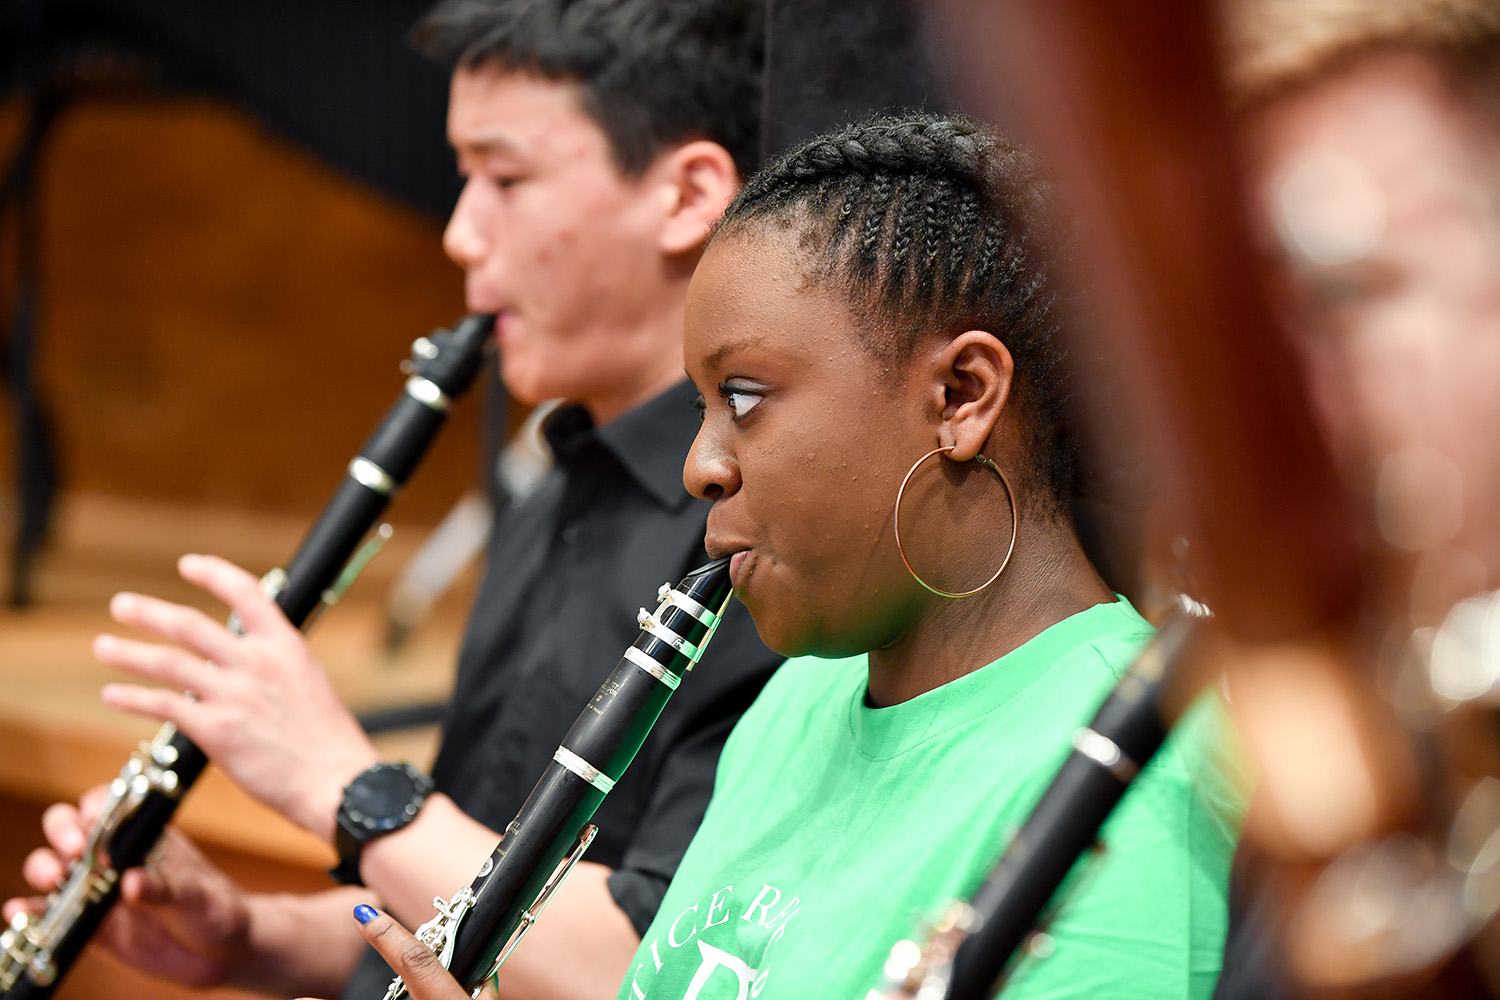 A JD student wearing bright green performs on a clarinet